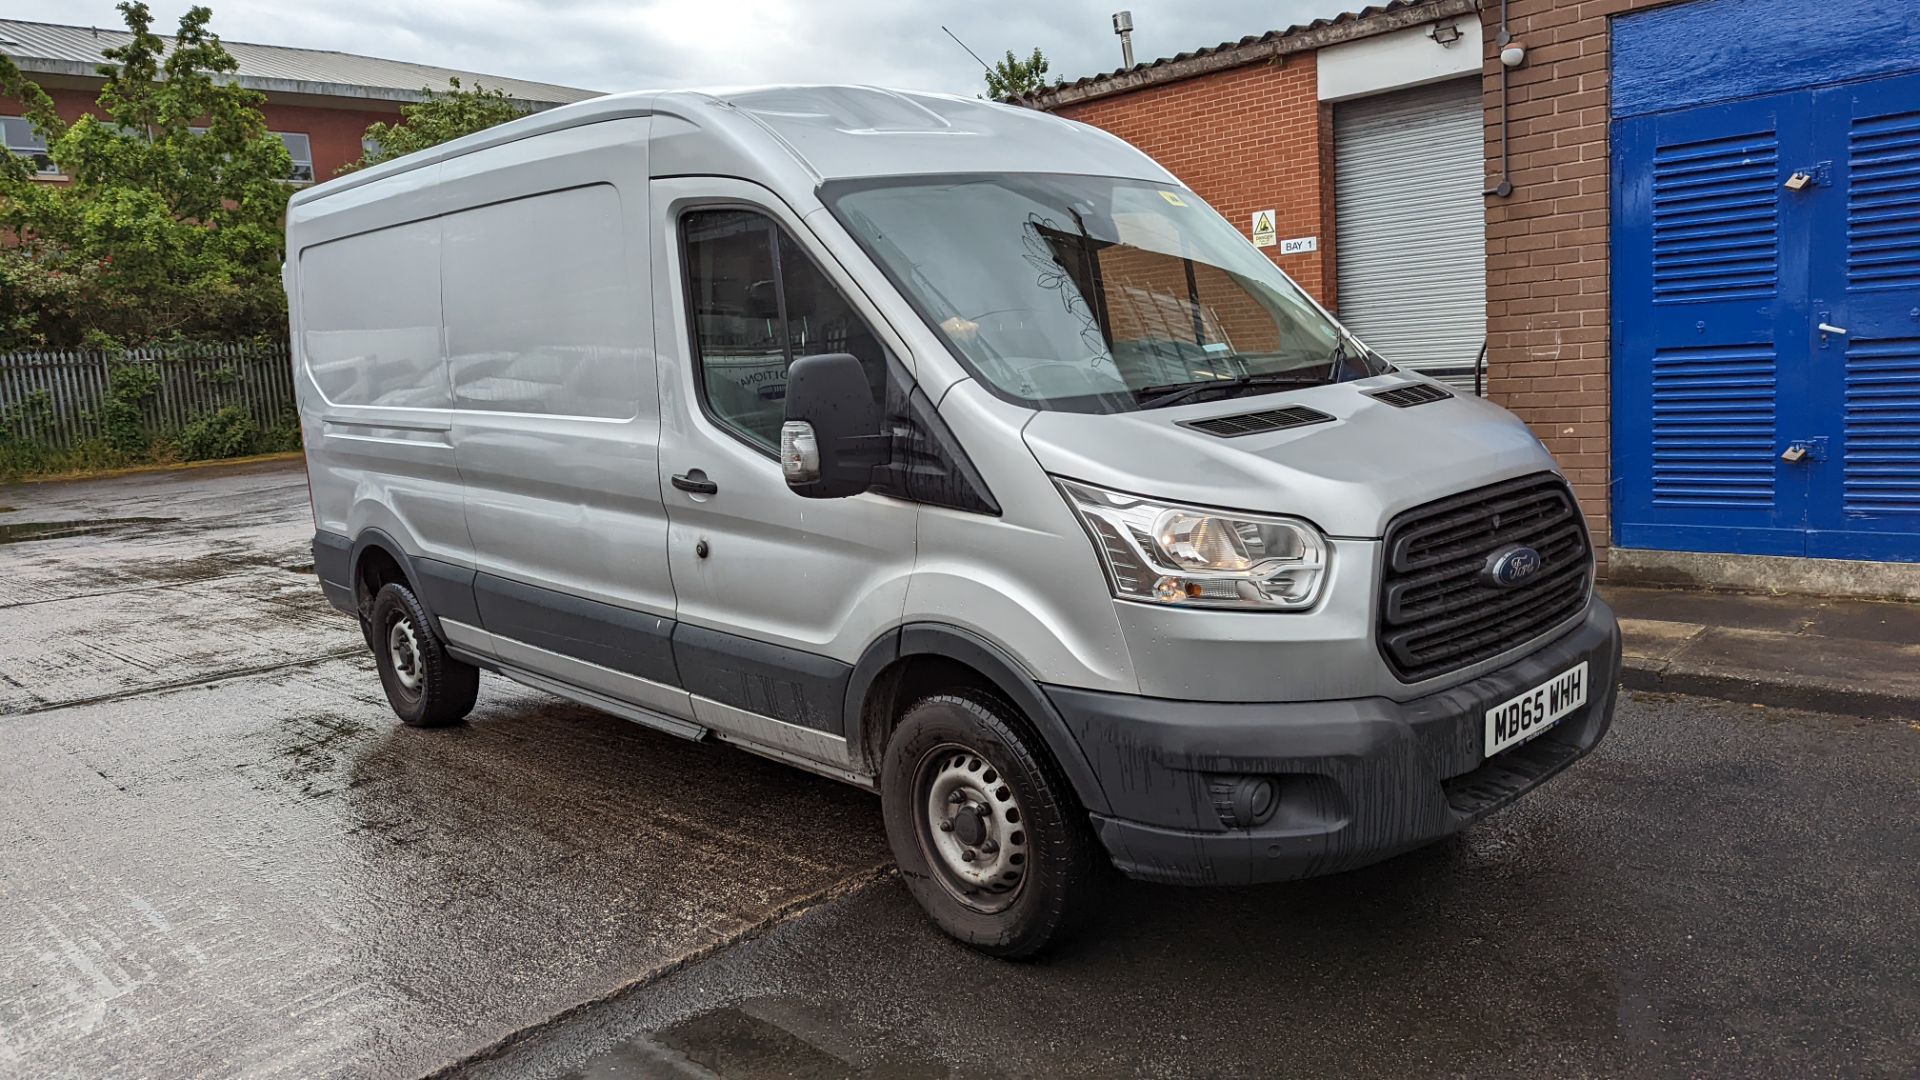 MD65 WHH Ford Transit 350, 6-speed manual gearbox, 2198cc diesel engine, 5981mm x 2550mm. Colour: Si